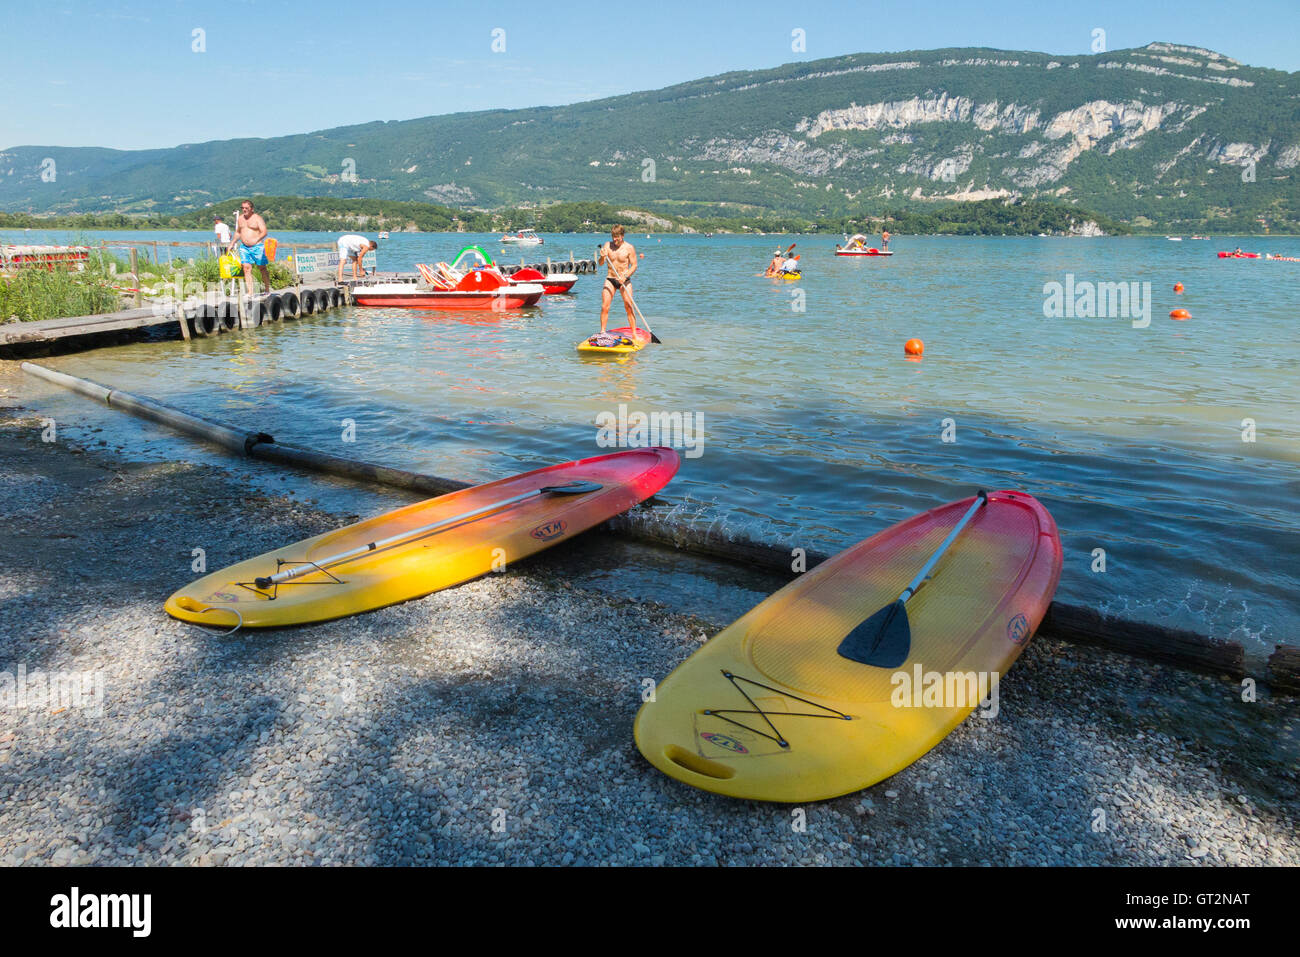 Beach / beachfront  on the lake at Conjux ( Port de Conjux ) – on Lake du Bourget (Lac Du Bourget) in Savoy, France. Stock Photo